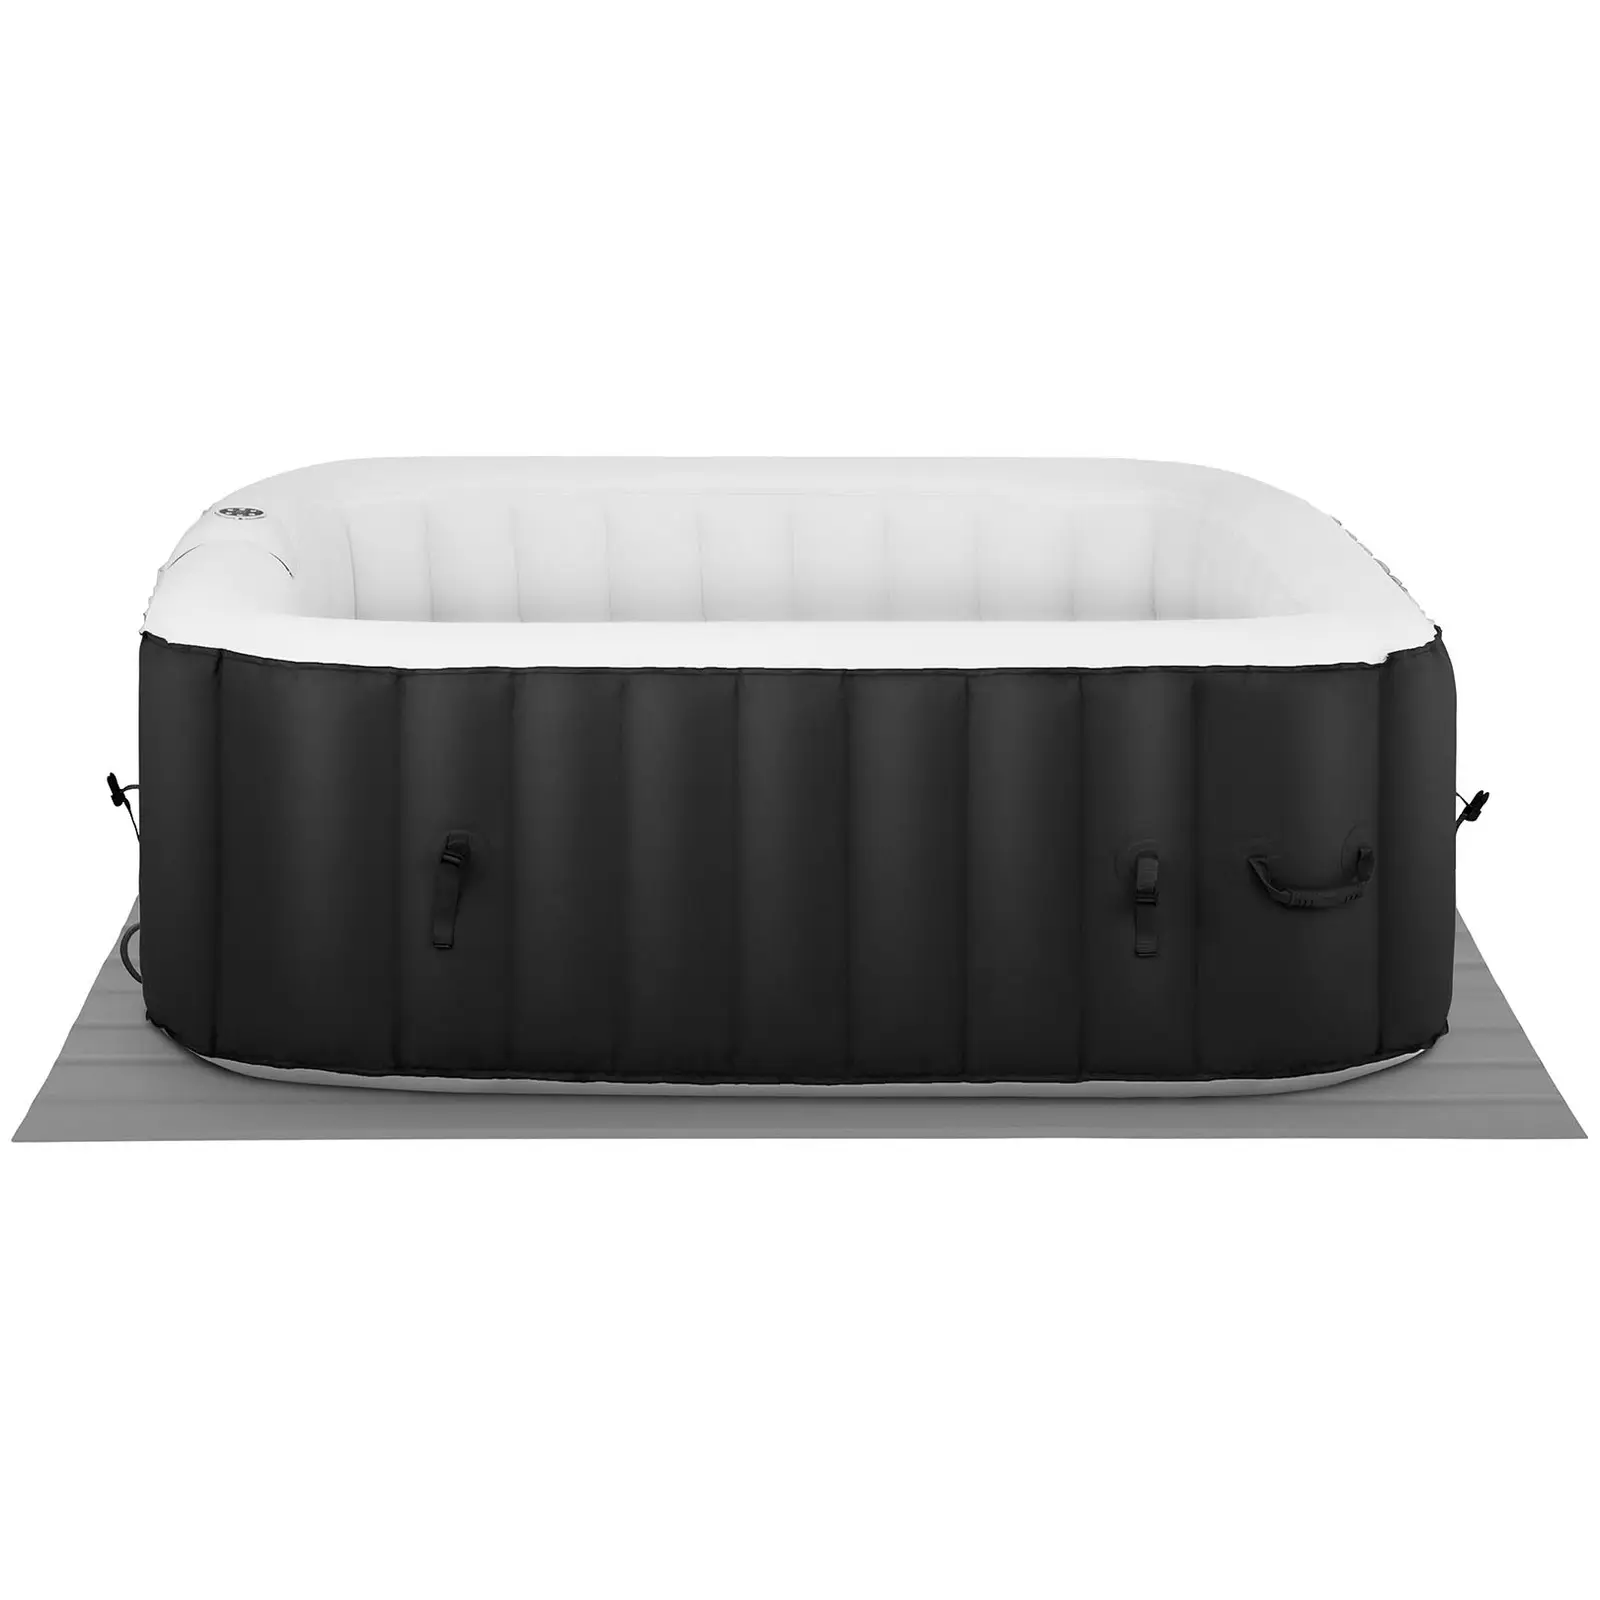 Inflatable Hot Tub - 900 L - 6 people - 130 nozzles - black/white